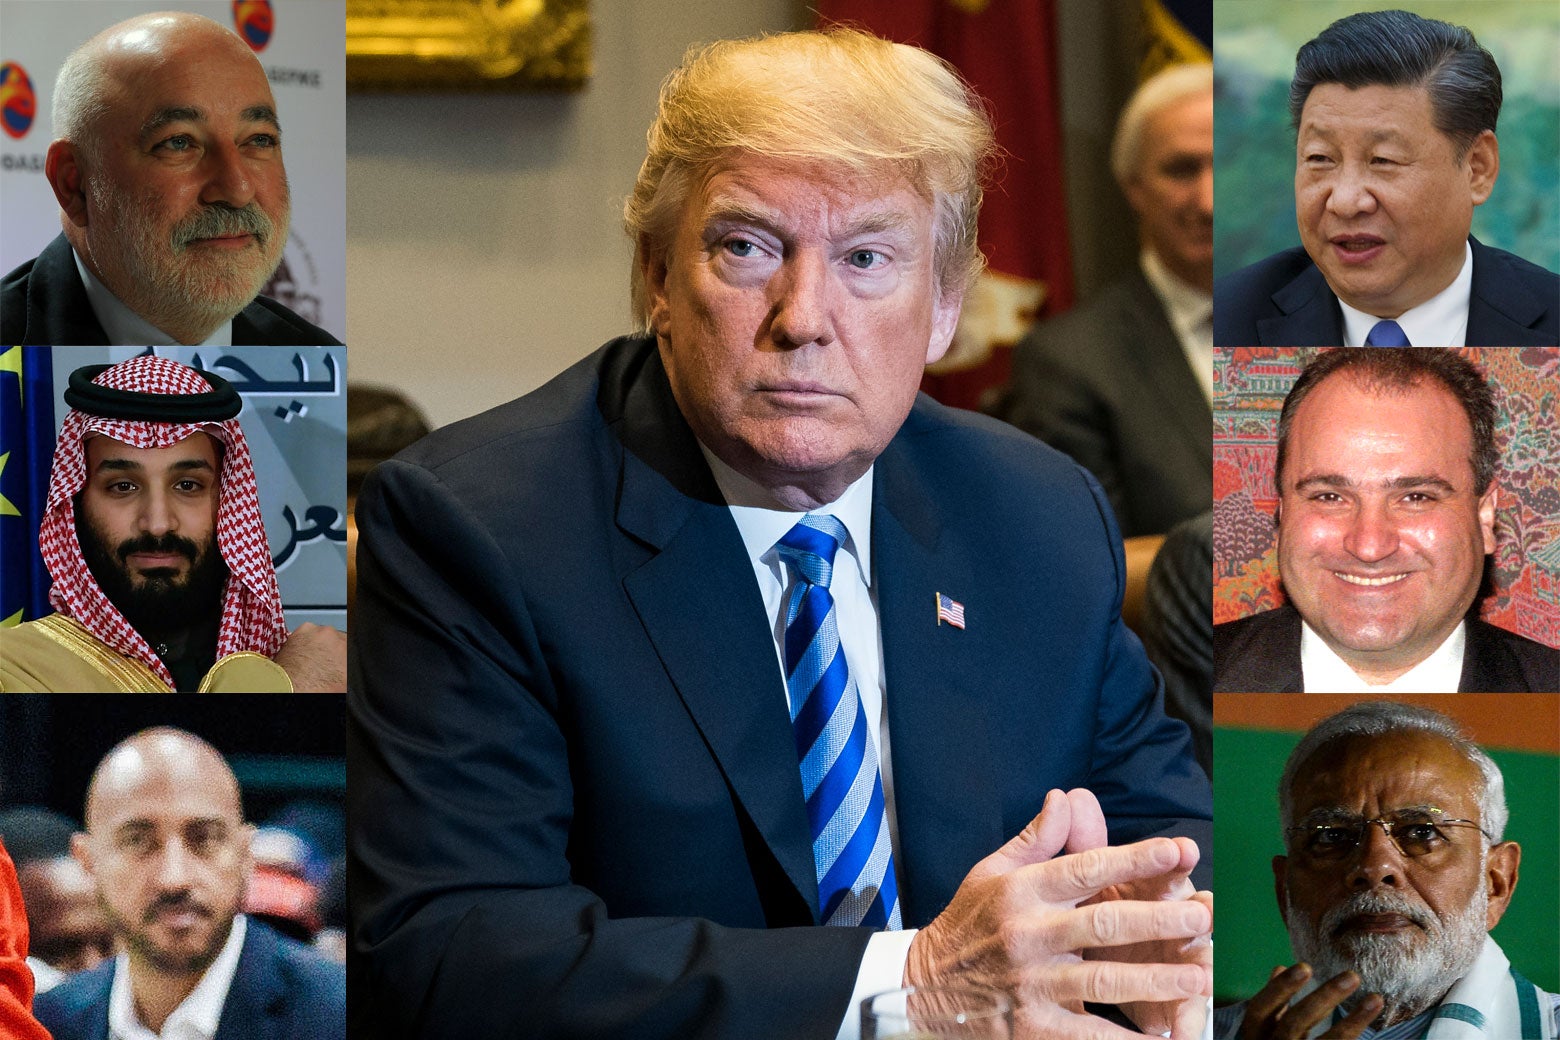 Headshots of the various individuals arrayed around a picture of Trump.